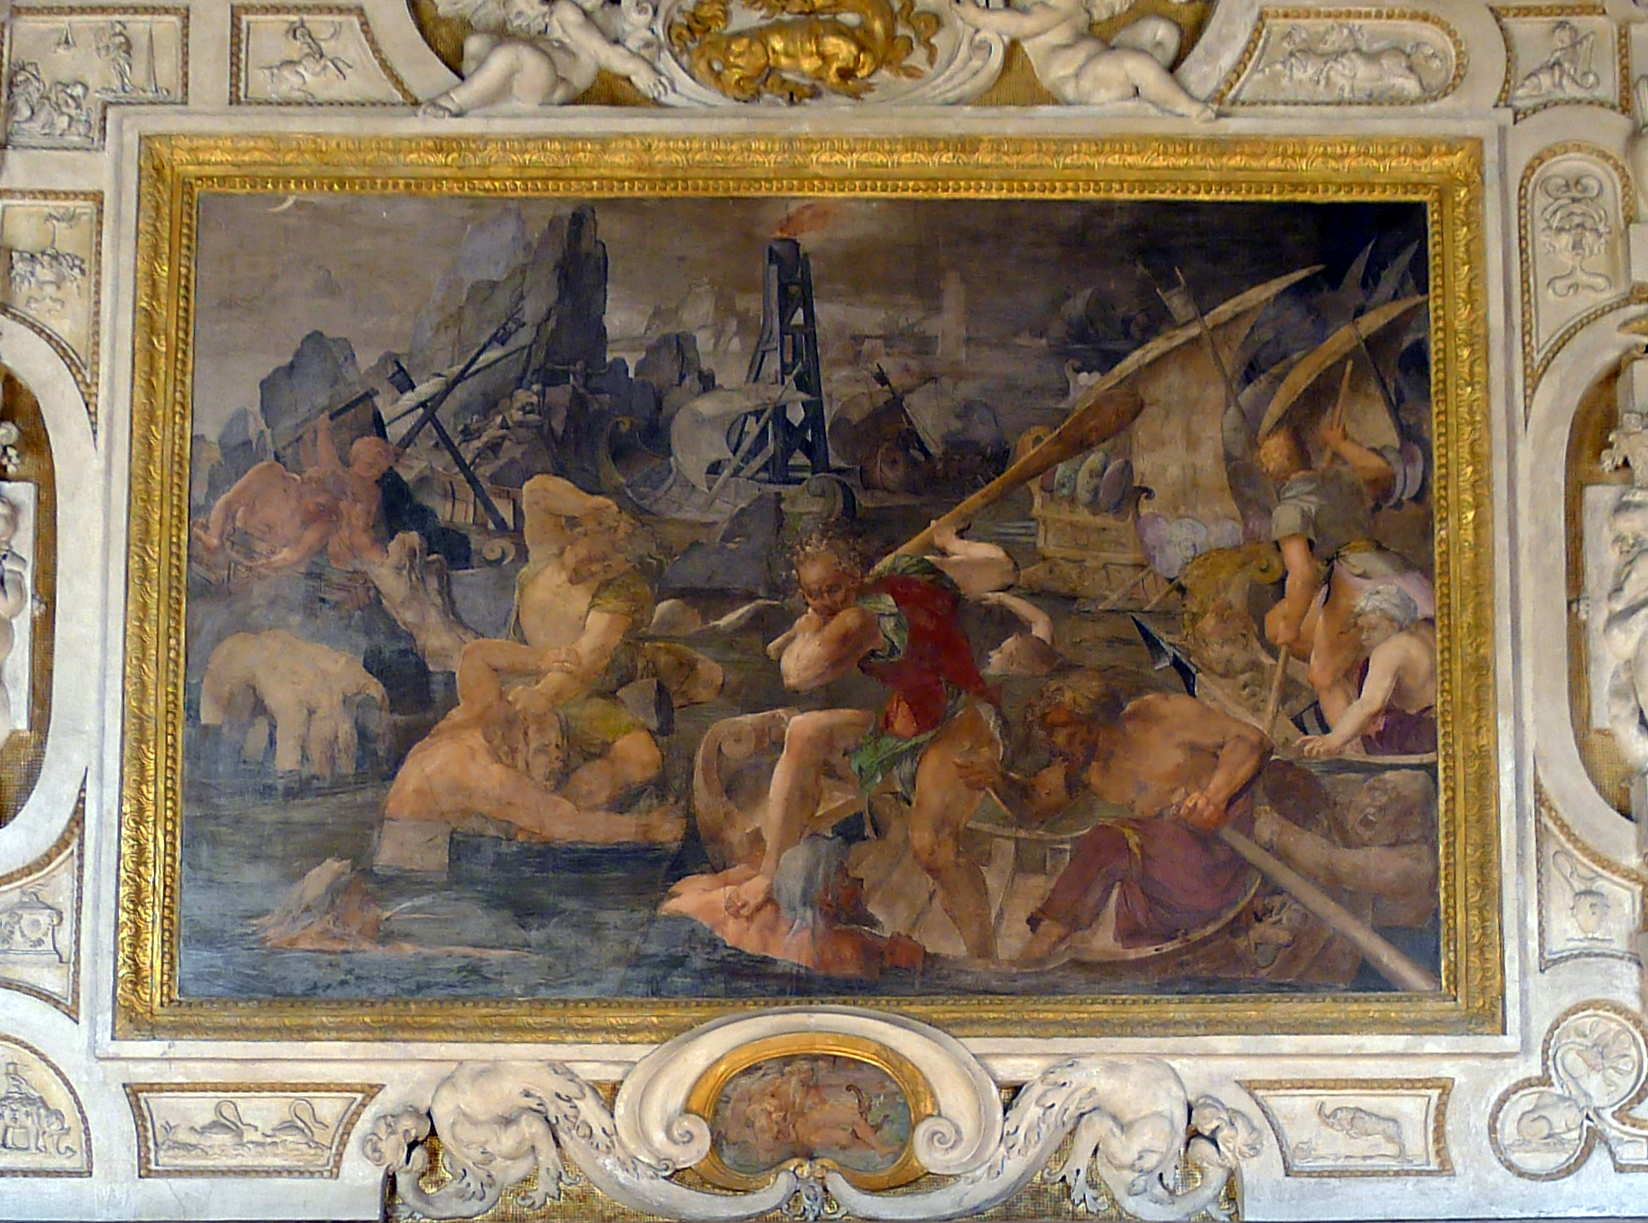 Workshop of Rosso Fiorentino, Revenge of Nauplius, Gallery of Francis I, Château de Fontainebleau, 1528-1540, fresco (photo: Corinne Moncelli, CC BY-NC-ND 2.0)